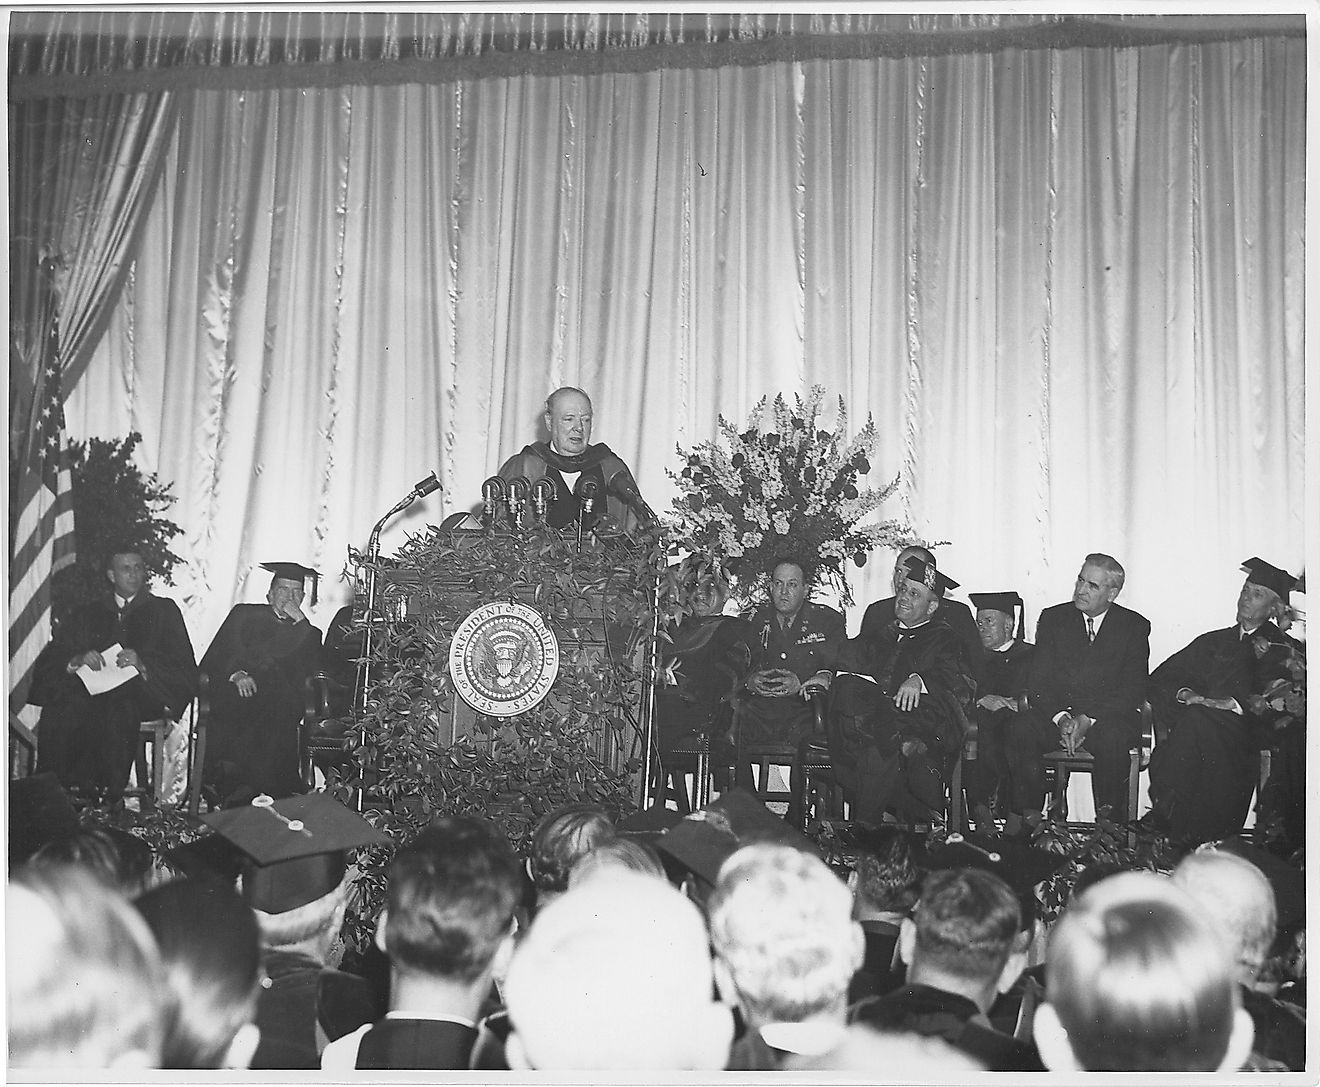 Winston Churchill "Iron Curtain" speech at Westminster College (MSA). Image credit: Missouri State Archives/Flickr.com